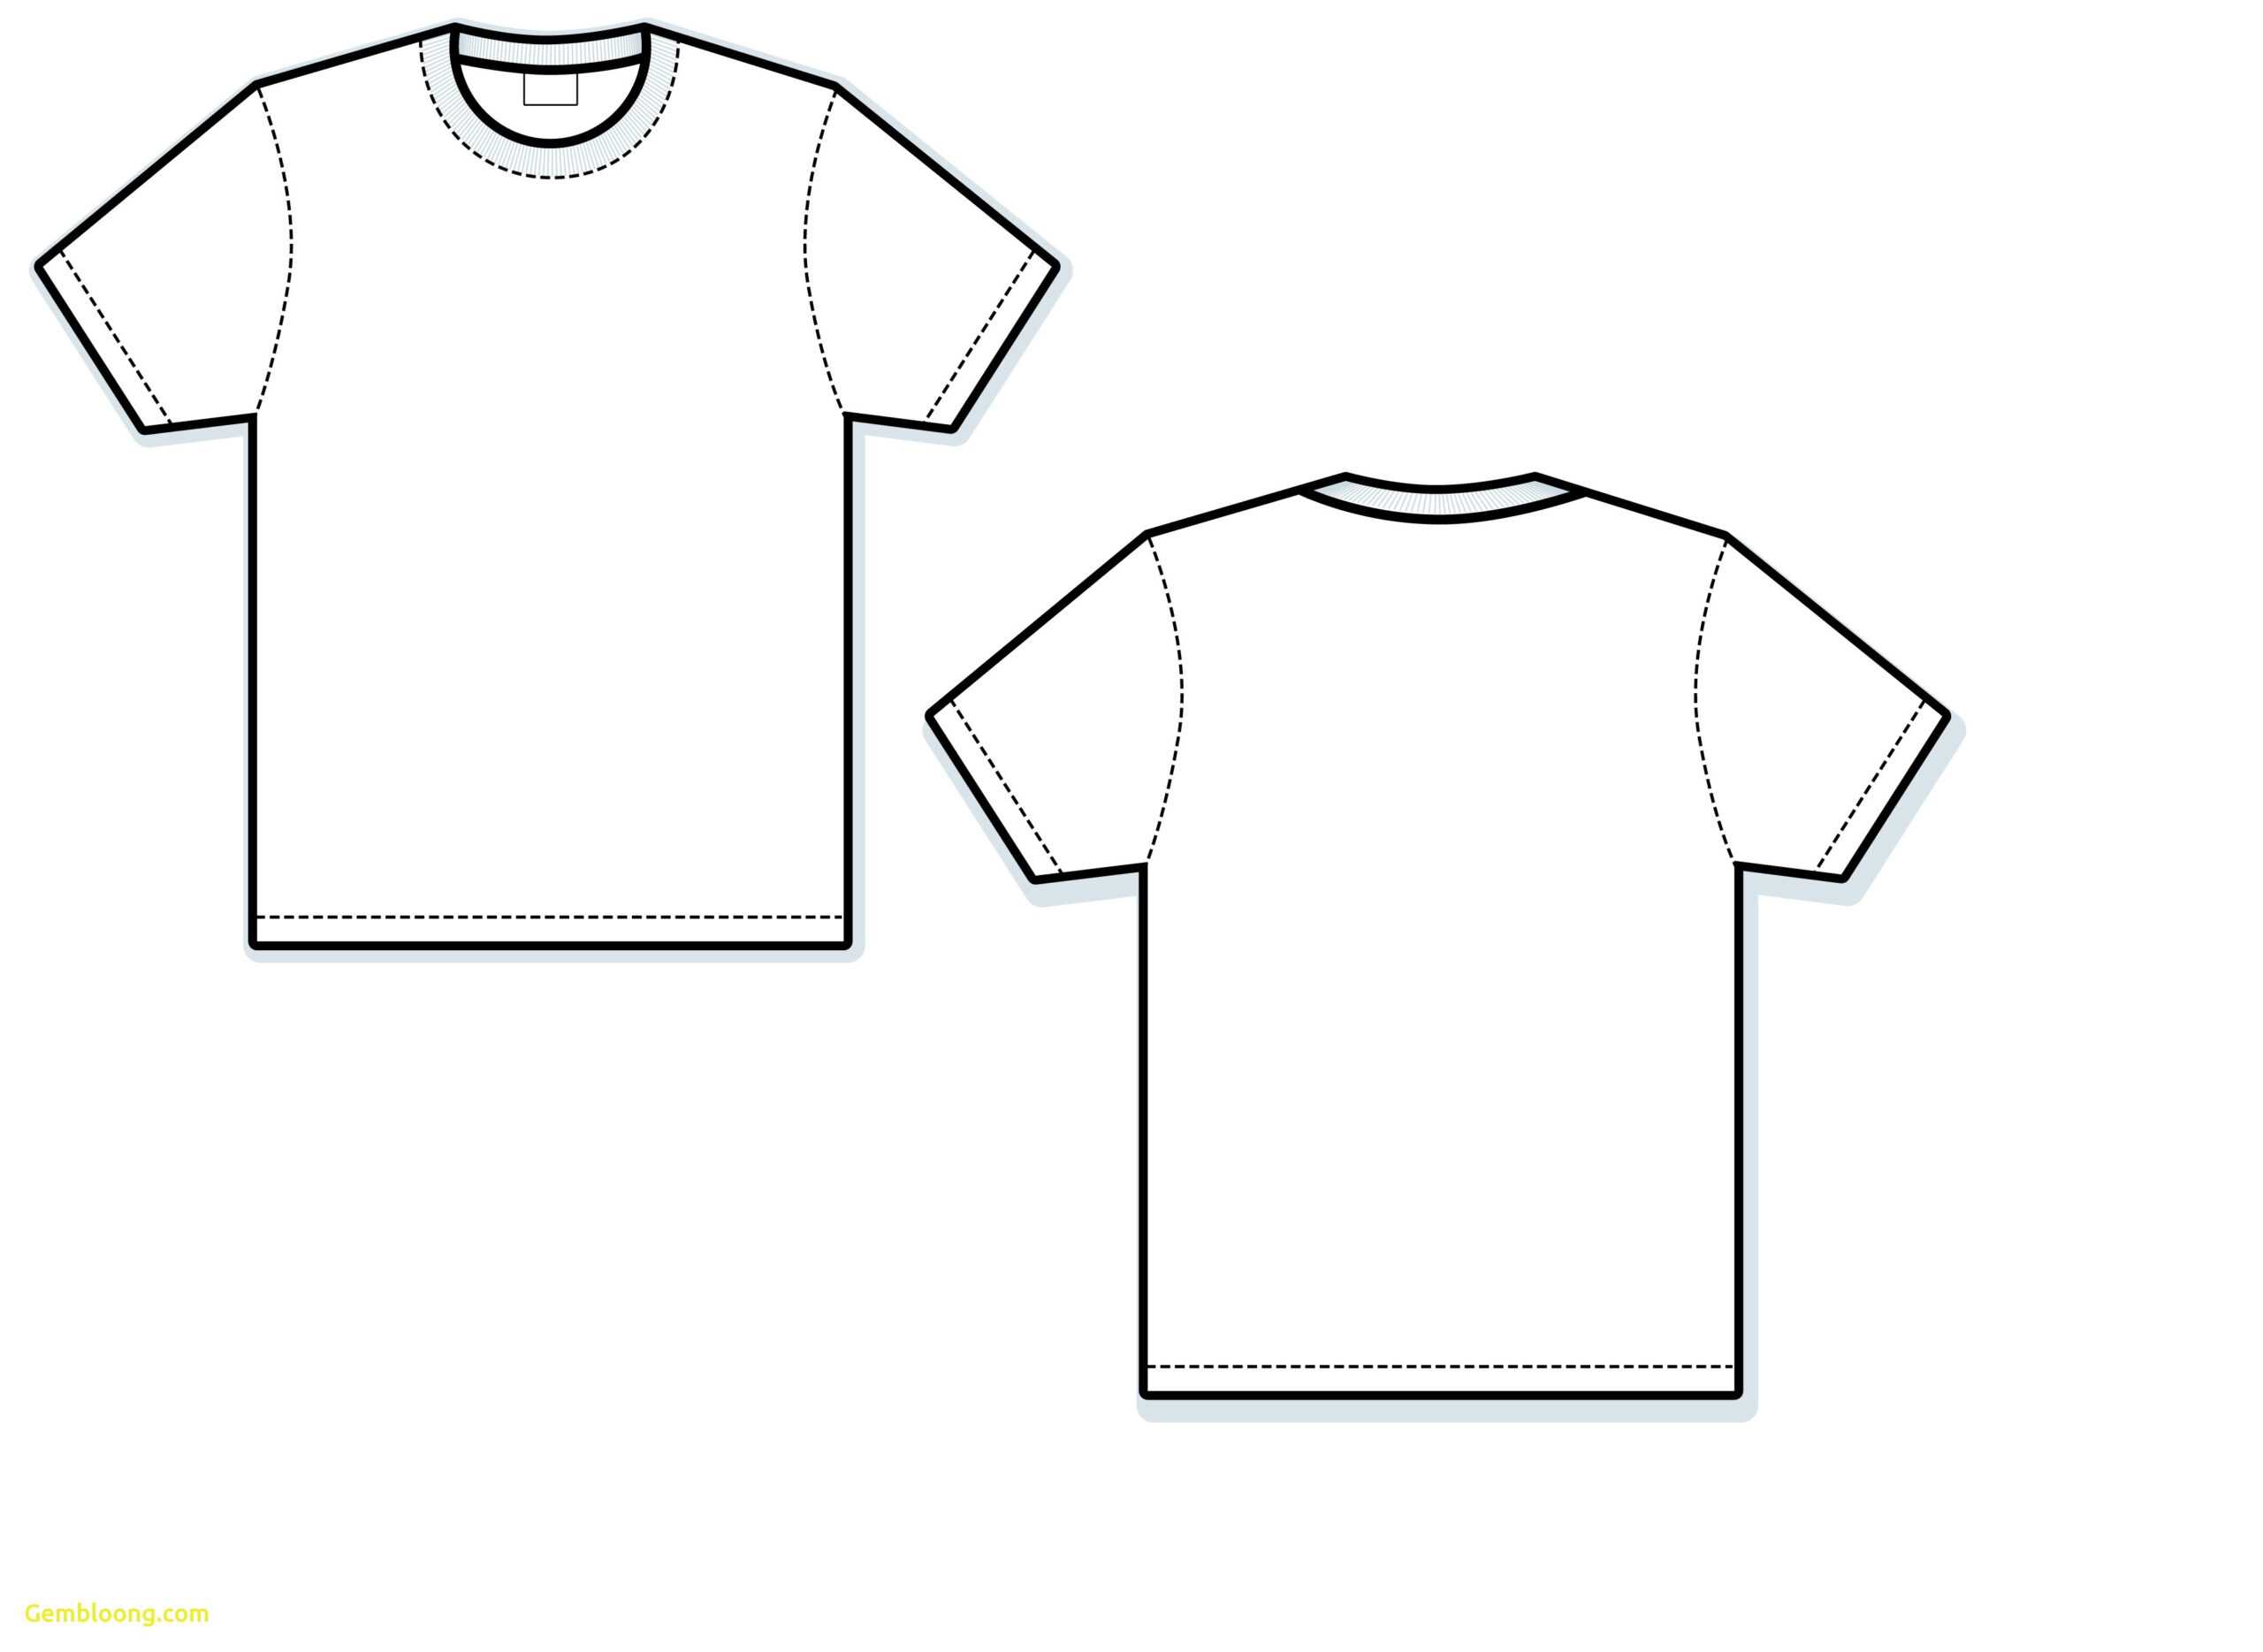 T Shirt Vector Image At Getdrawings | Free For Personal With Regard To Blank Tee Shirt Template